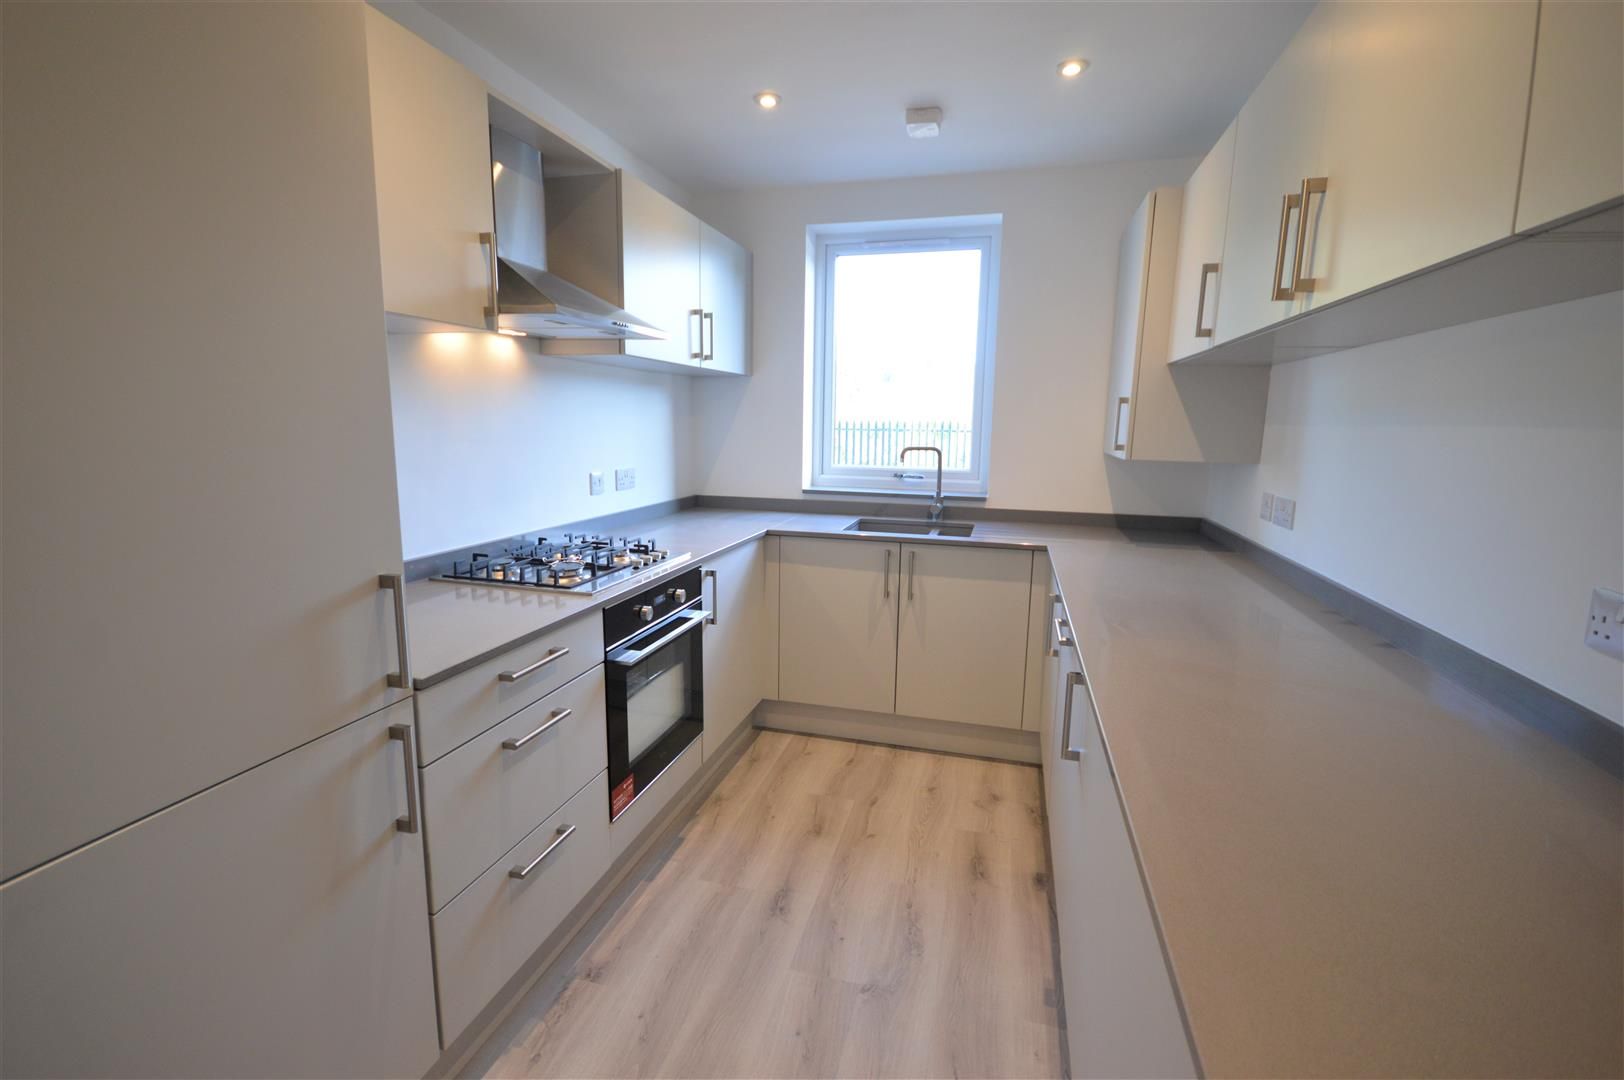 2 bed terraced for sale in Leominster 4